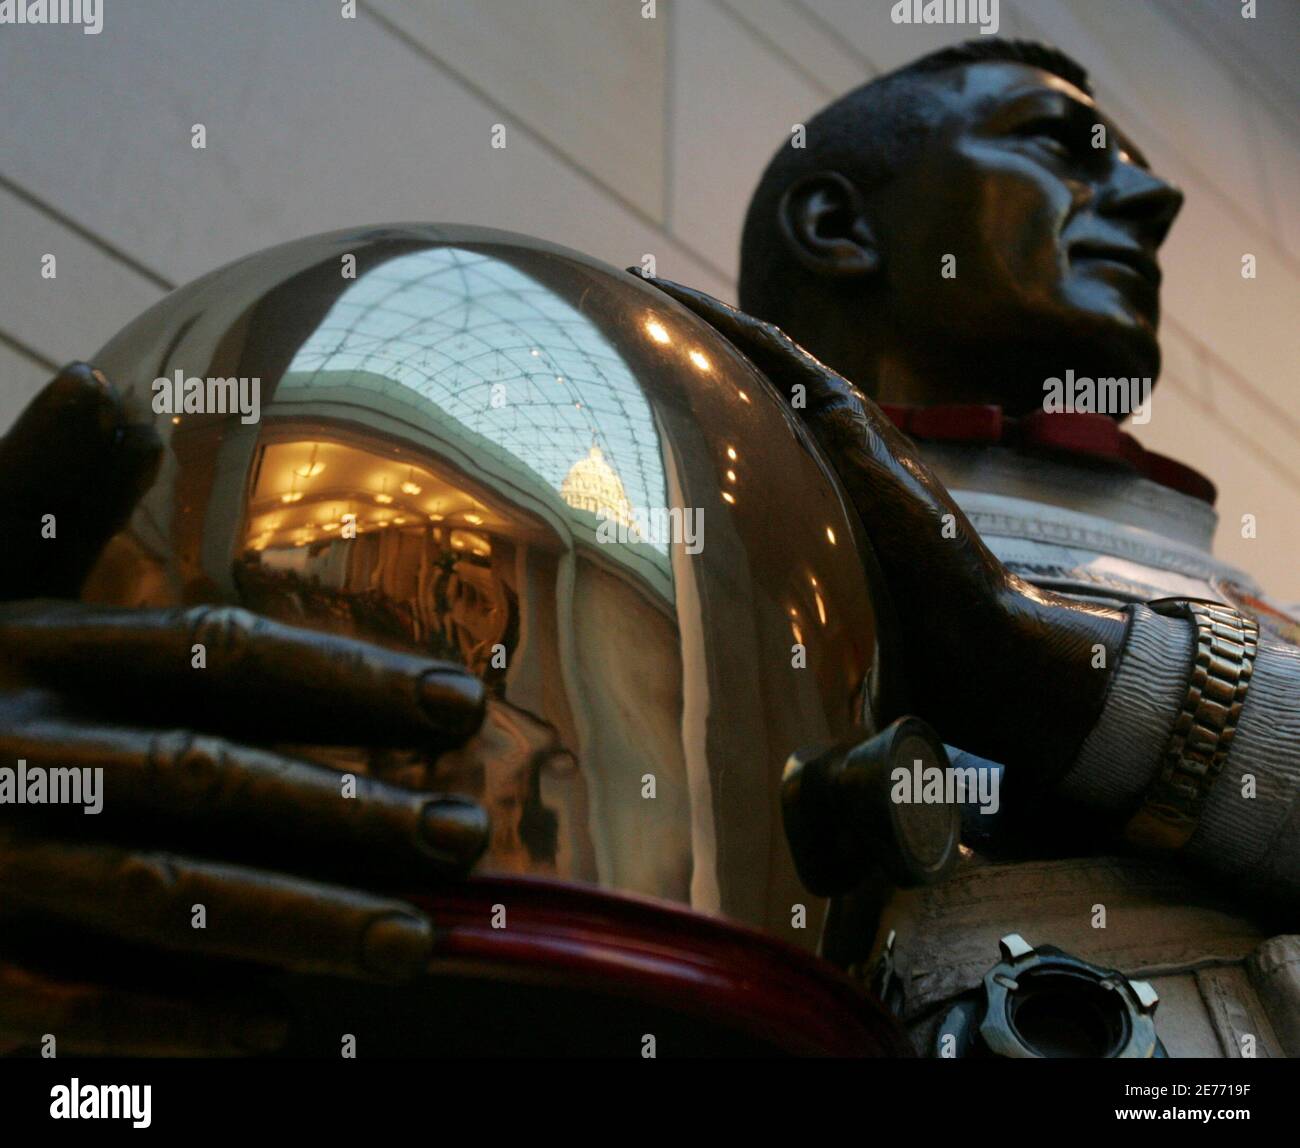 The U.S. Capitol is reflected in a statue of astronaut John Swigert Jr. in the Capitol Visitors Center (CVC) before its opening ceremony in Washington December 2, 2008. The CVC comes after six years of construction and will provide information to visitors of the Capitol. REUTERS/Mitch Dumke (UNITED STATES) REUTERS Stock Photo